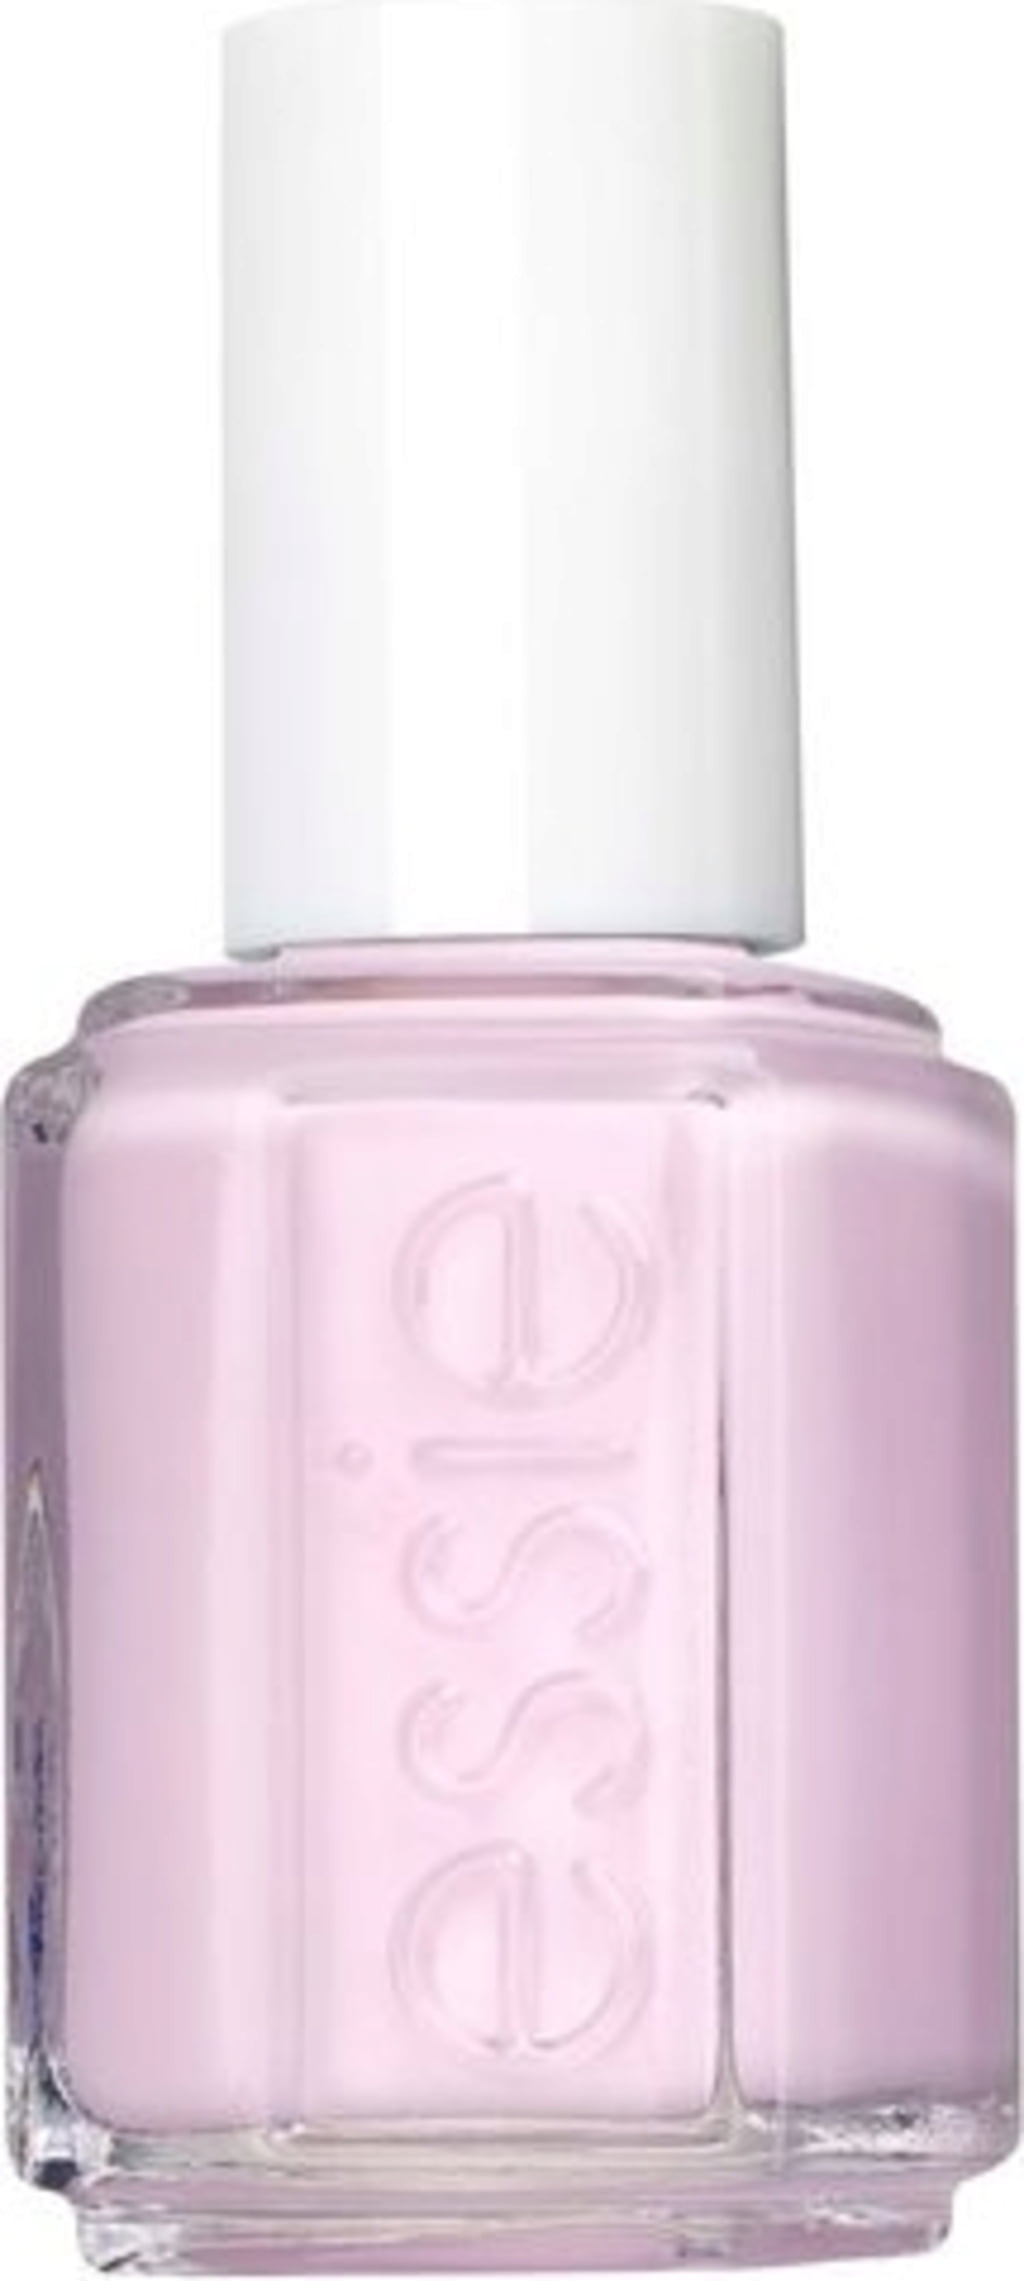 essie Nail Polish - 857 Pencil Me in 13.5ml - FREE Delivery